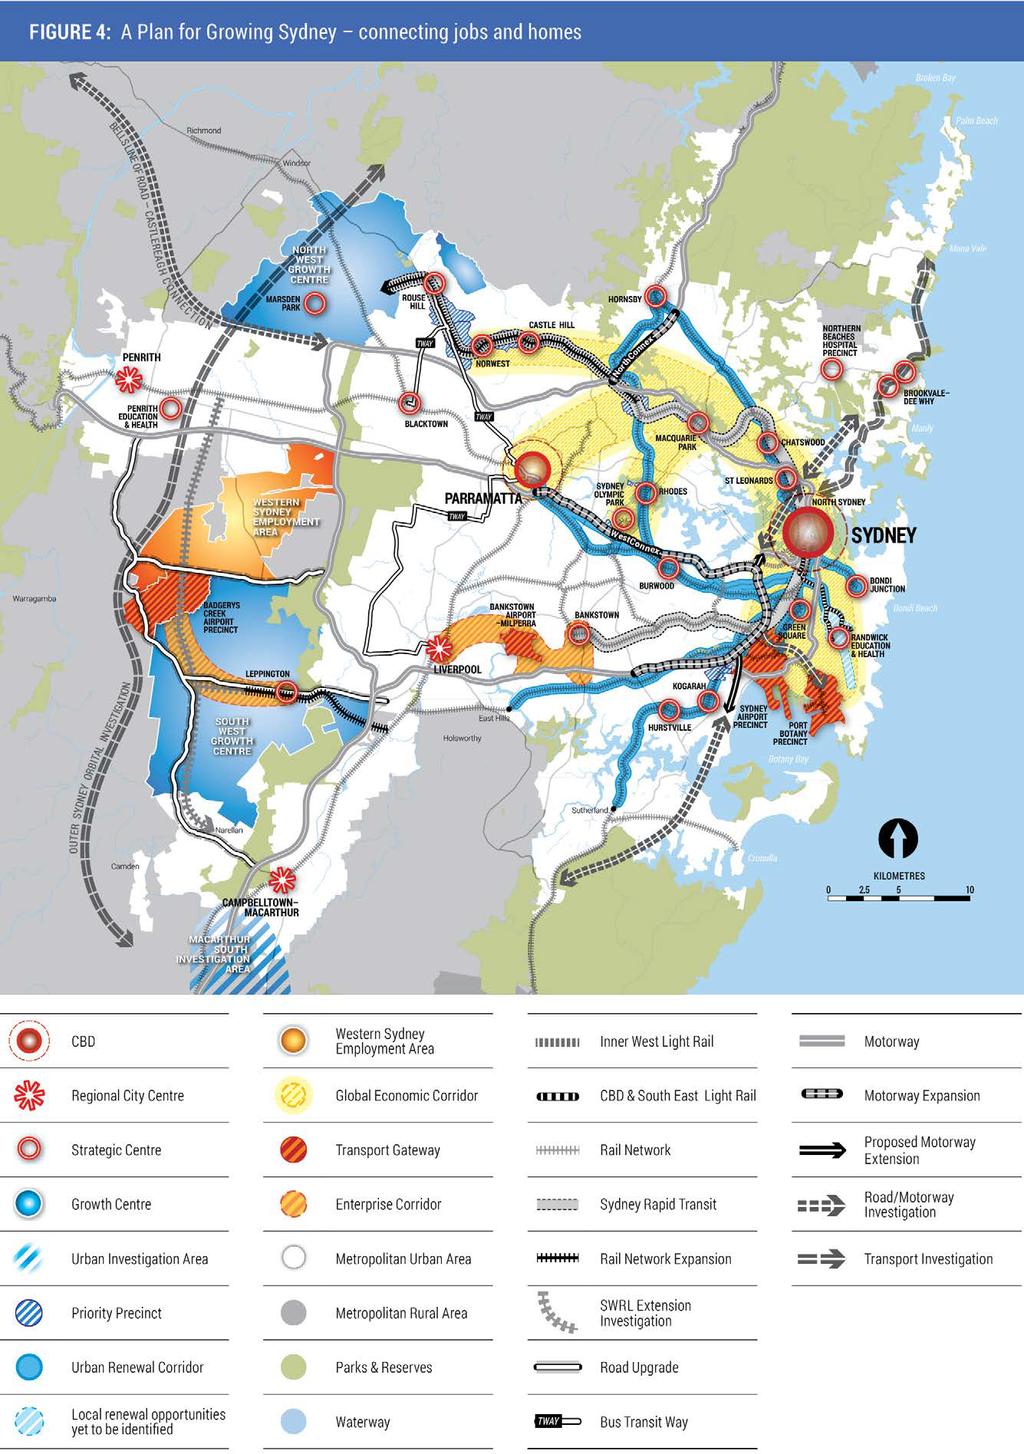 NSW State Planning Framework: A Plan for Growing Sydney BADGERYS CREEK AIRPORT